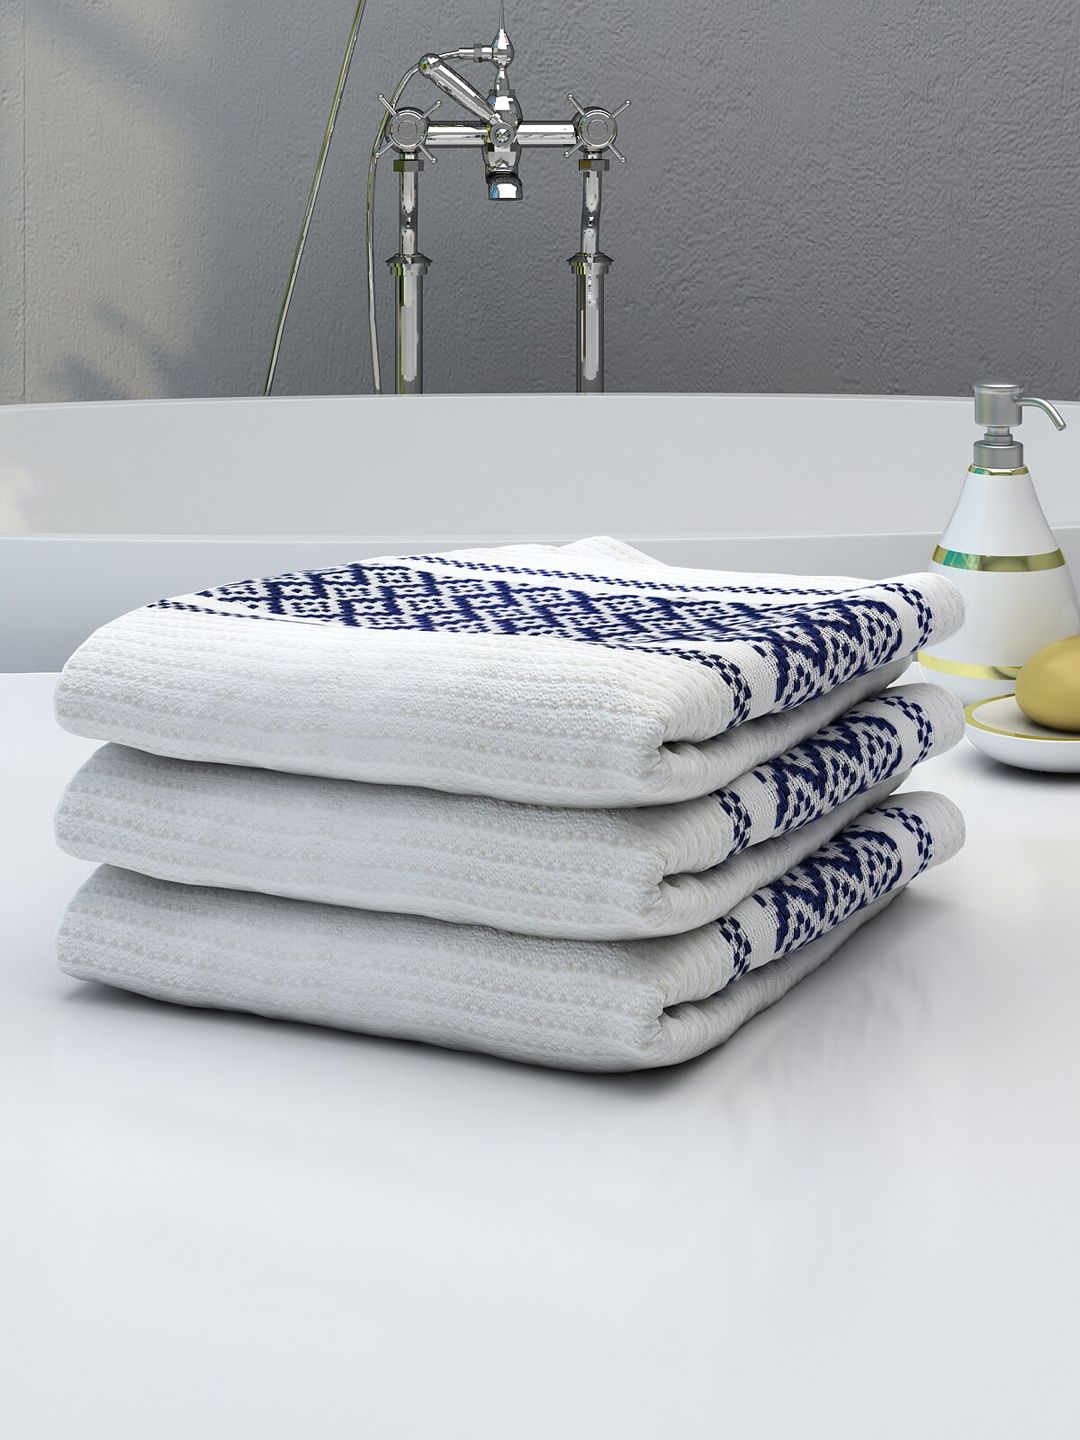 Athom Trendz Set Of 3 White & Blue Striped 210 GSM Pure Cotton Bath Towels Price in India